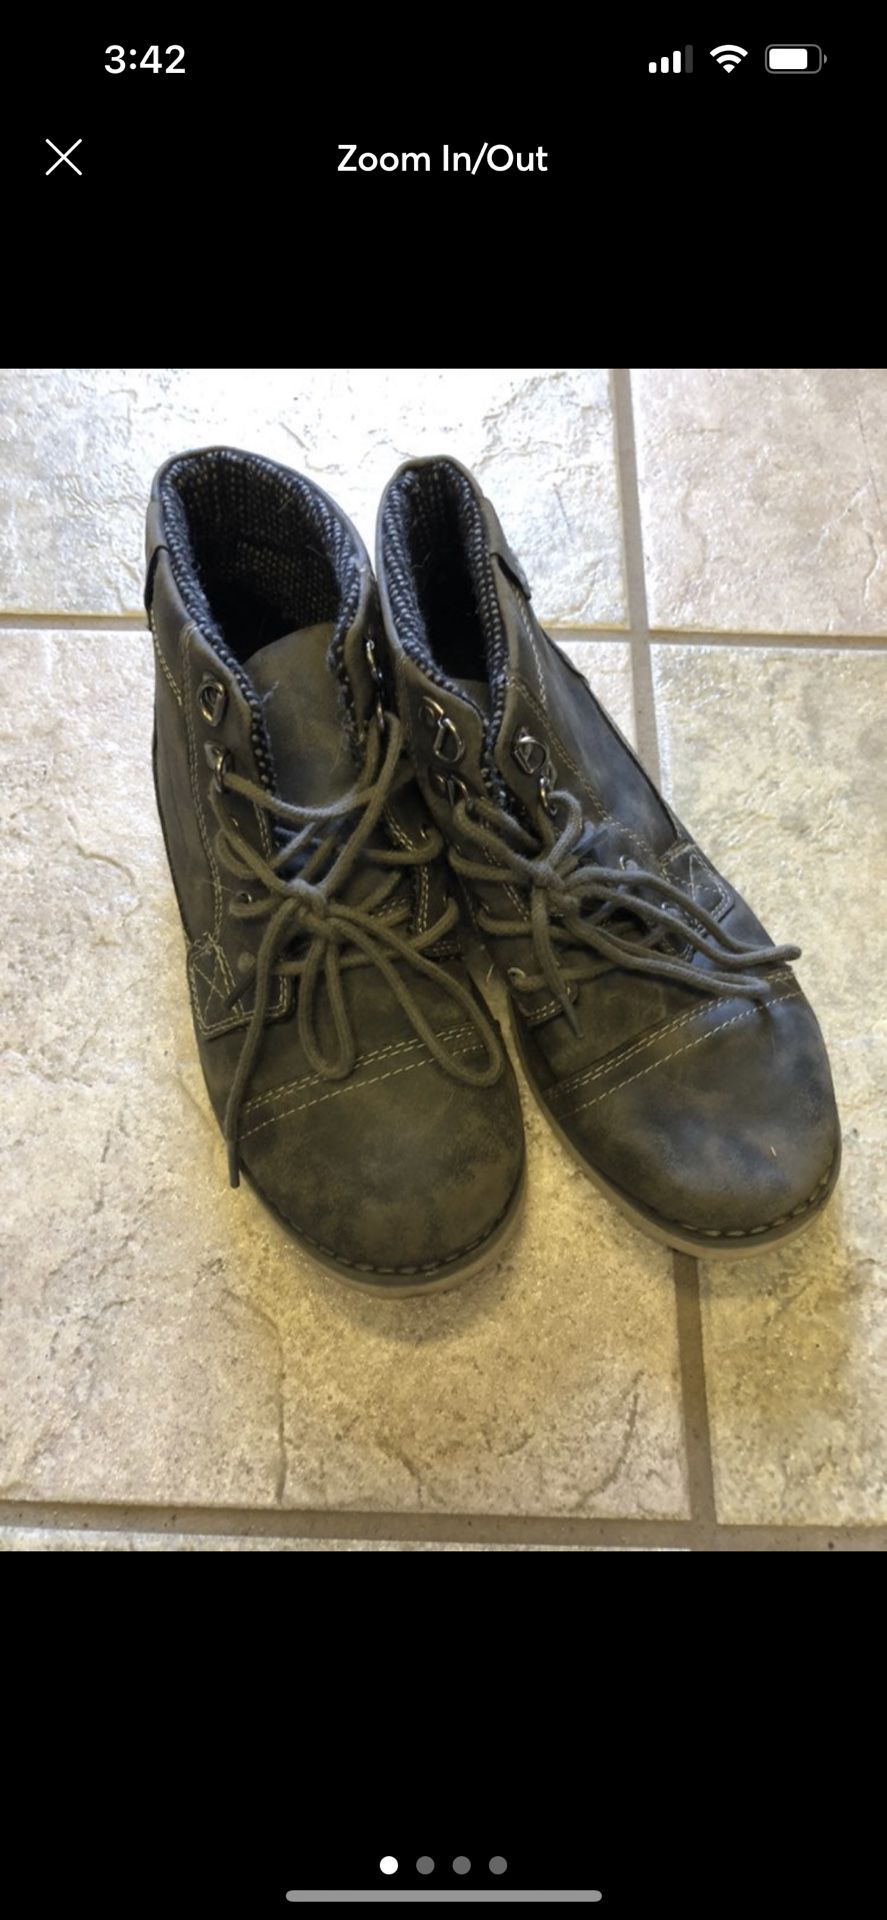 Target Boys Boots - Size 4